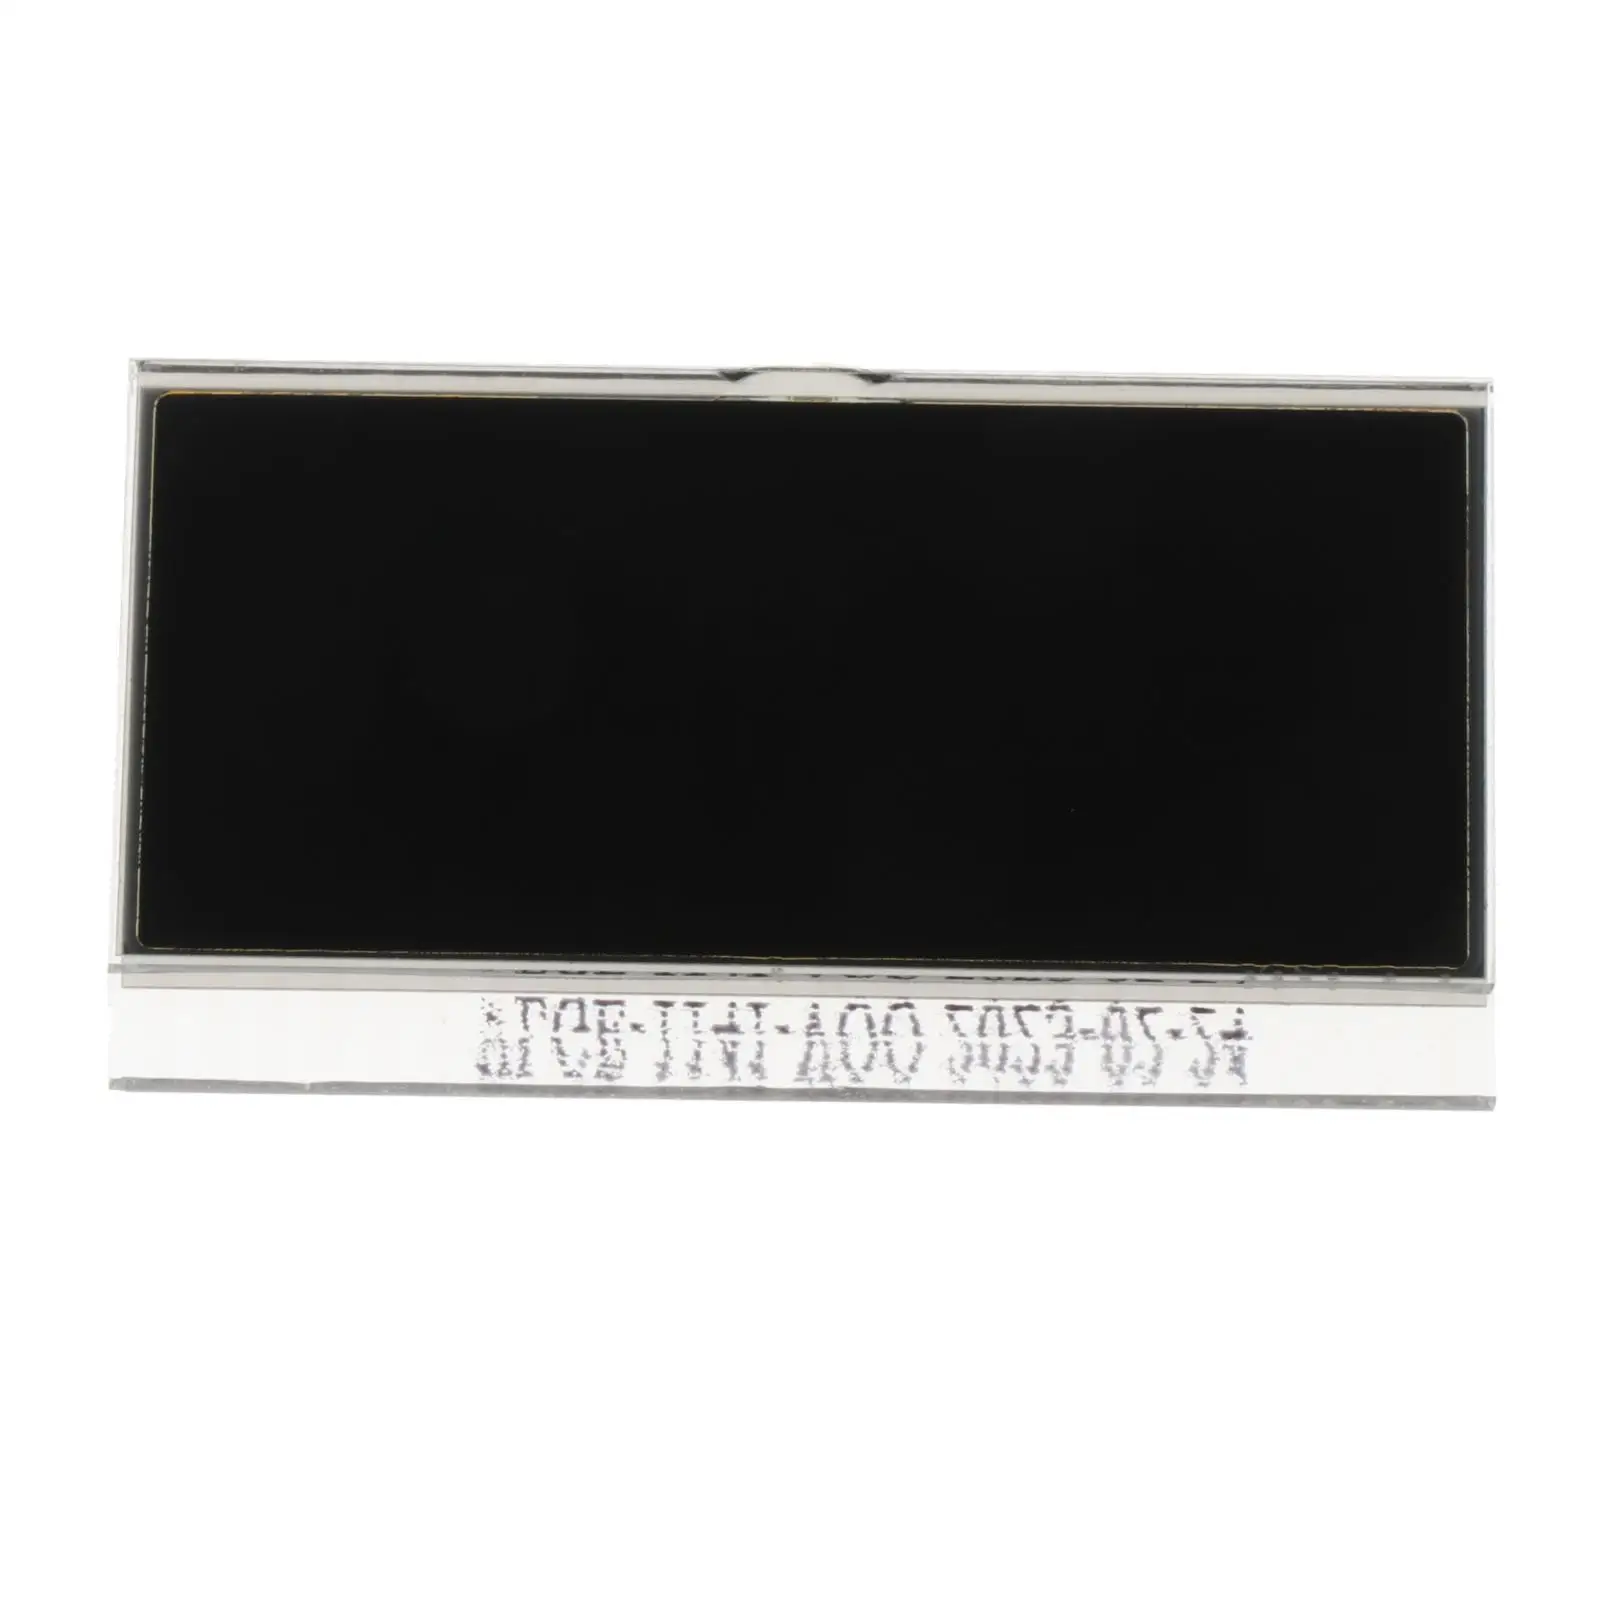 LCD Screen Air Conditioning Pixel Repair Replacement Parts Professional Durable for Audi A6 4F Q7 4L 2005-2012 Accessories